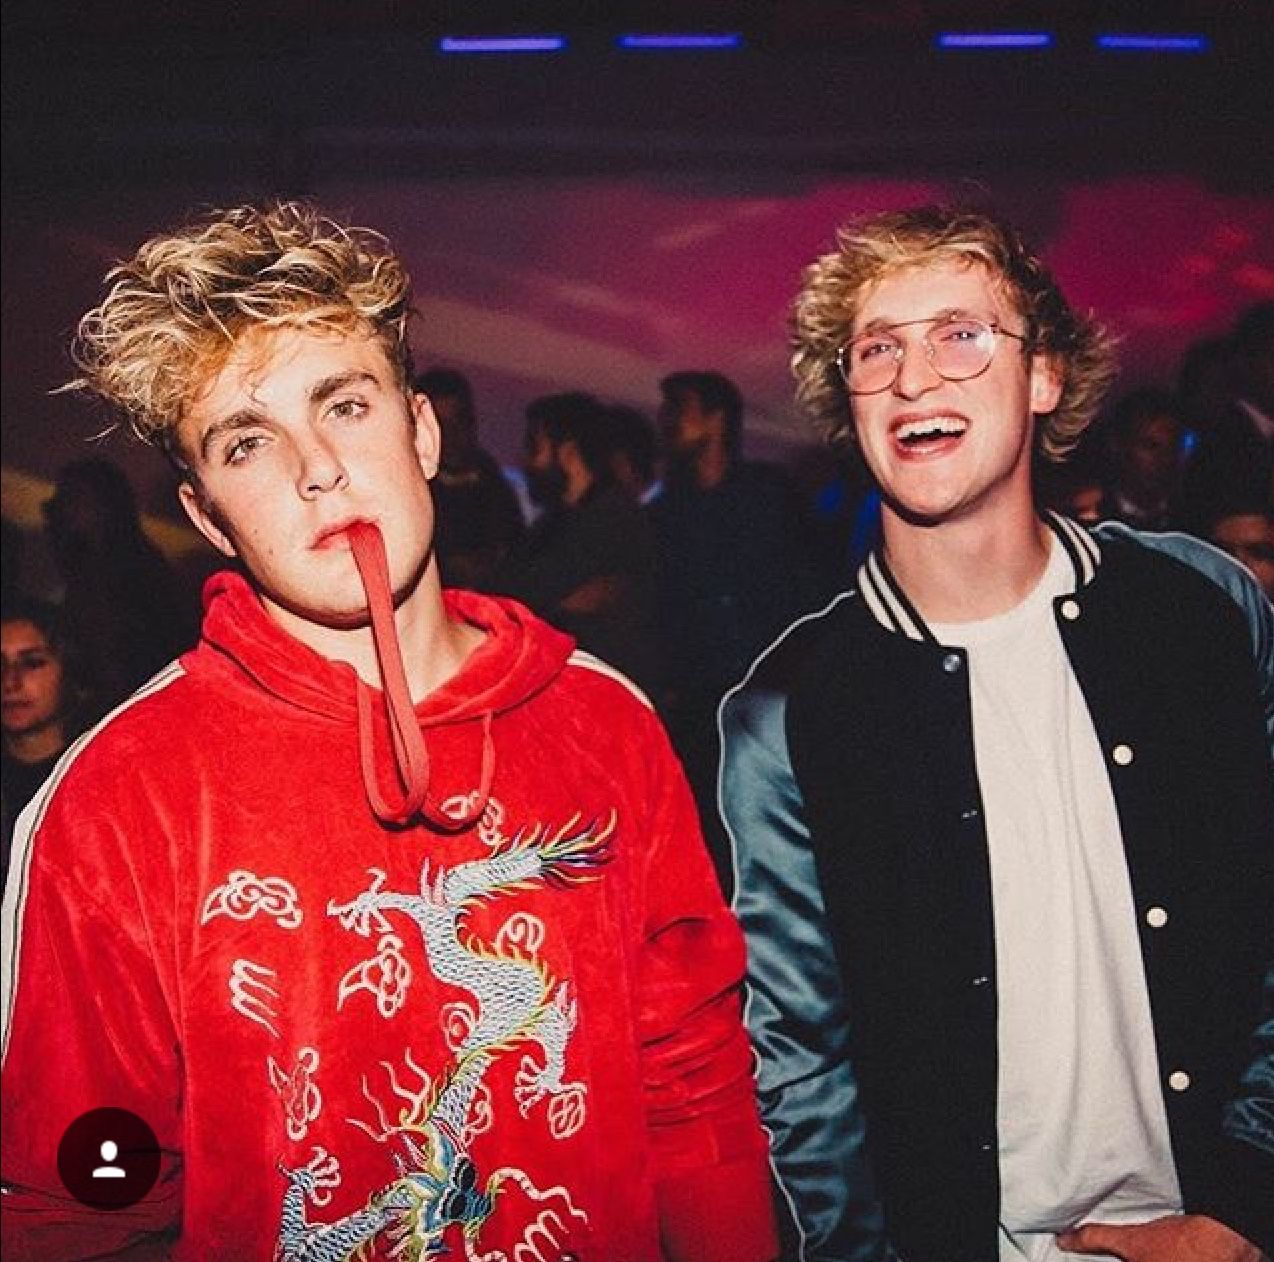 Wallpaper Jake Paul APK 10 for Android  Download Wallpaper Jake Paul APK  Latest Version from APKFabcom